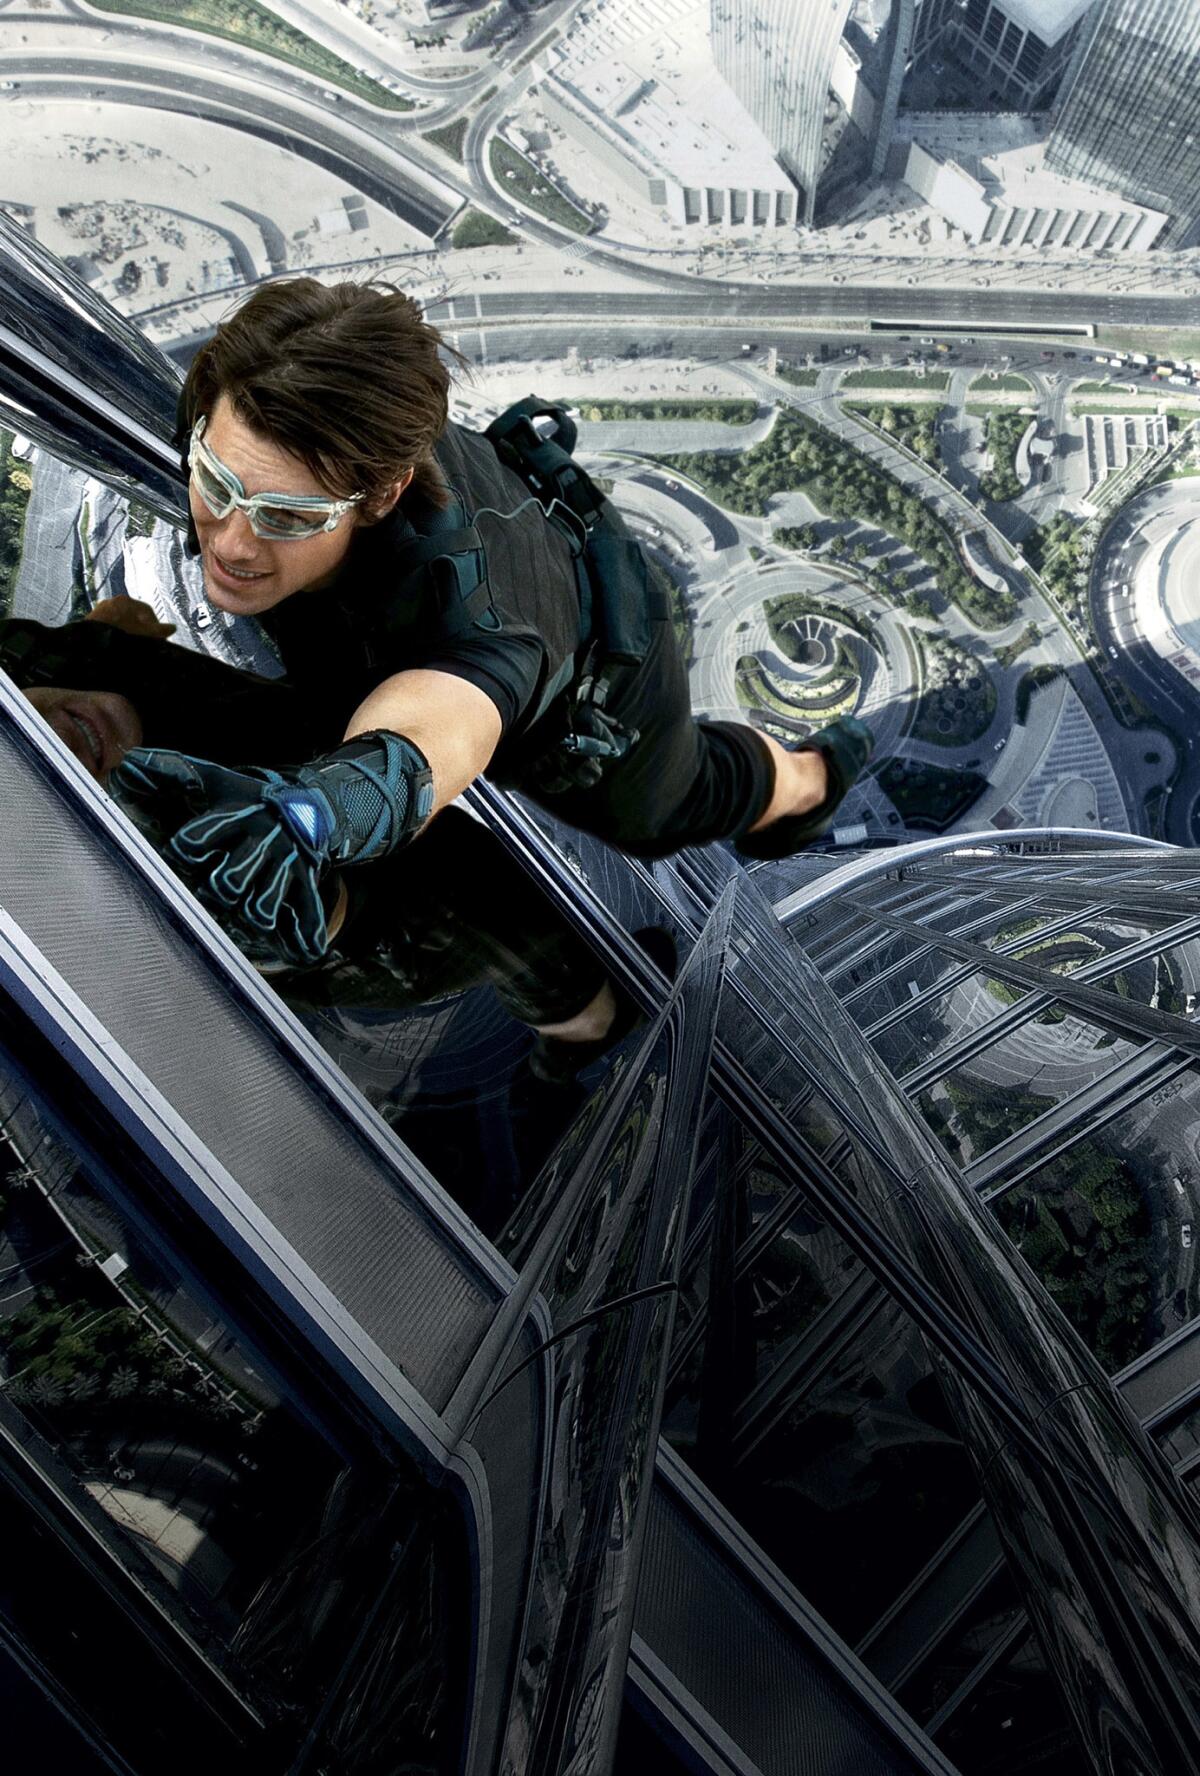 Tom Cruise climbs a building in a scene from the film "Mission: Impossible â Ghost Protocol."